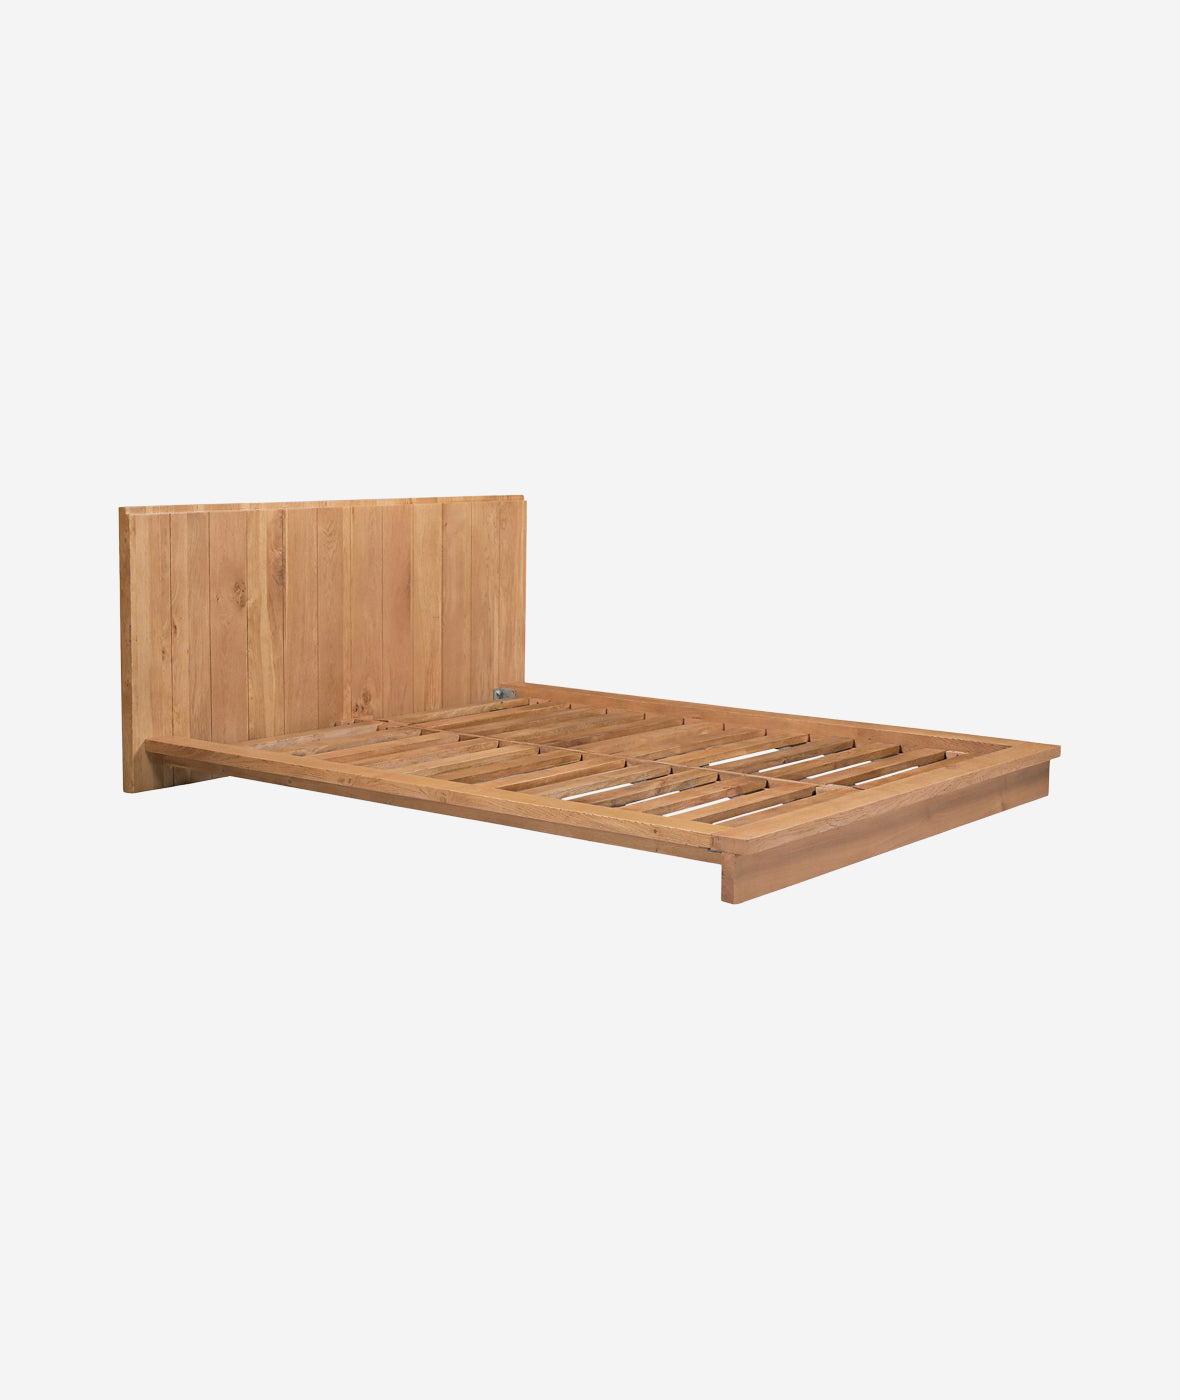 Plank Bed - More Options